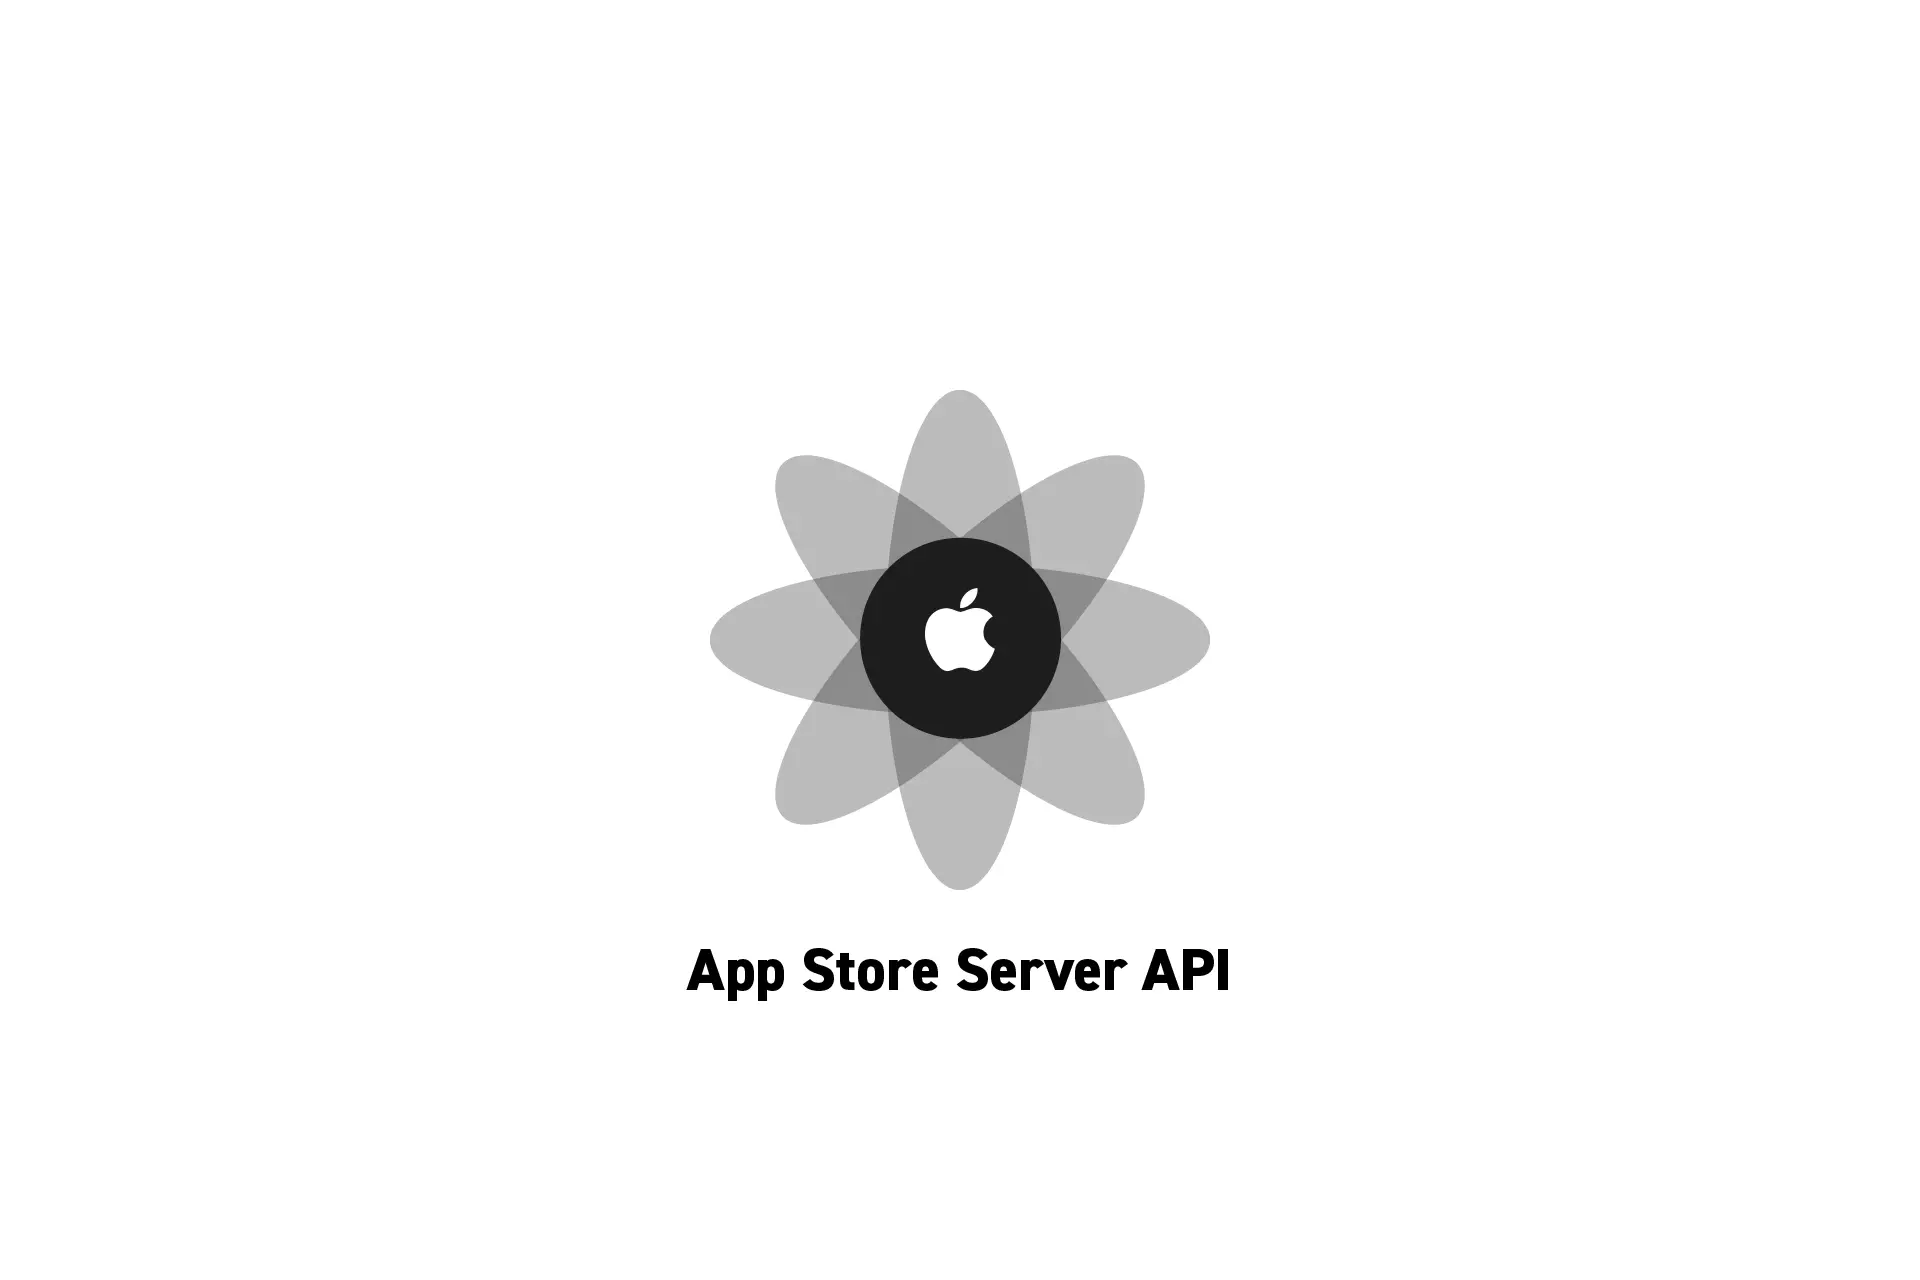 A flower that represents Apple with the text "App Store Server API Uses Cases" beneath it.